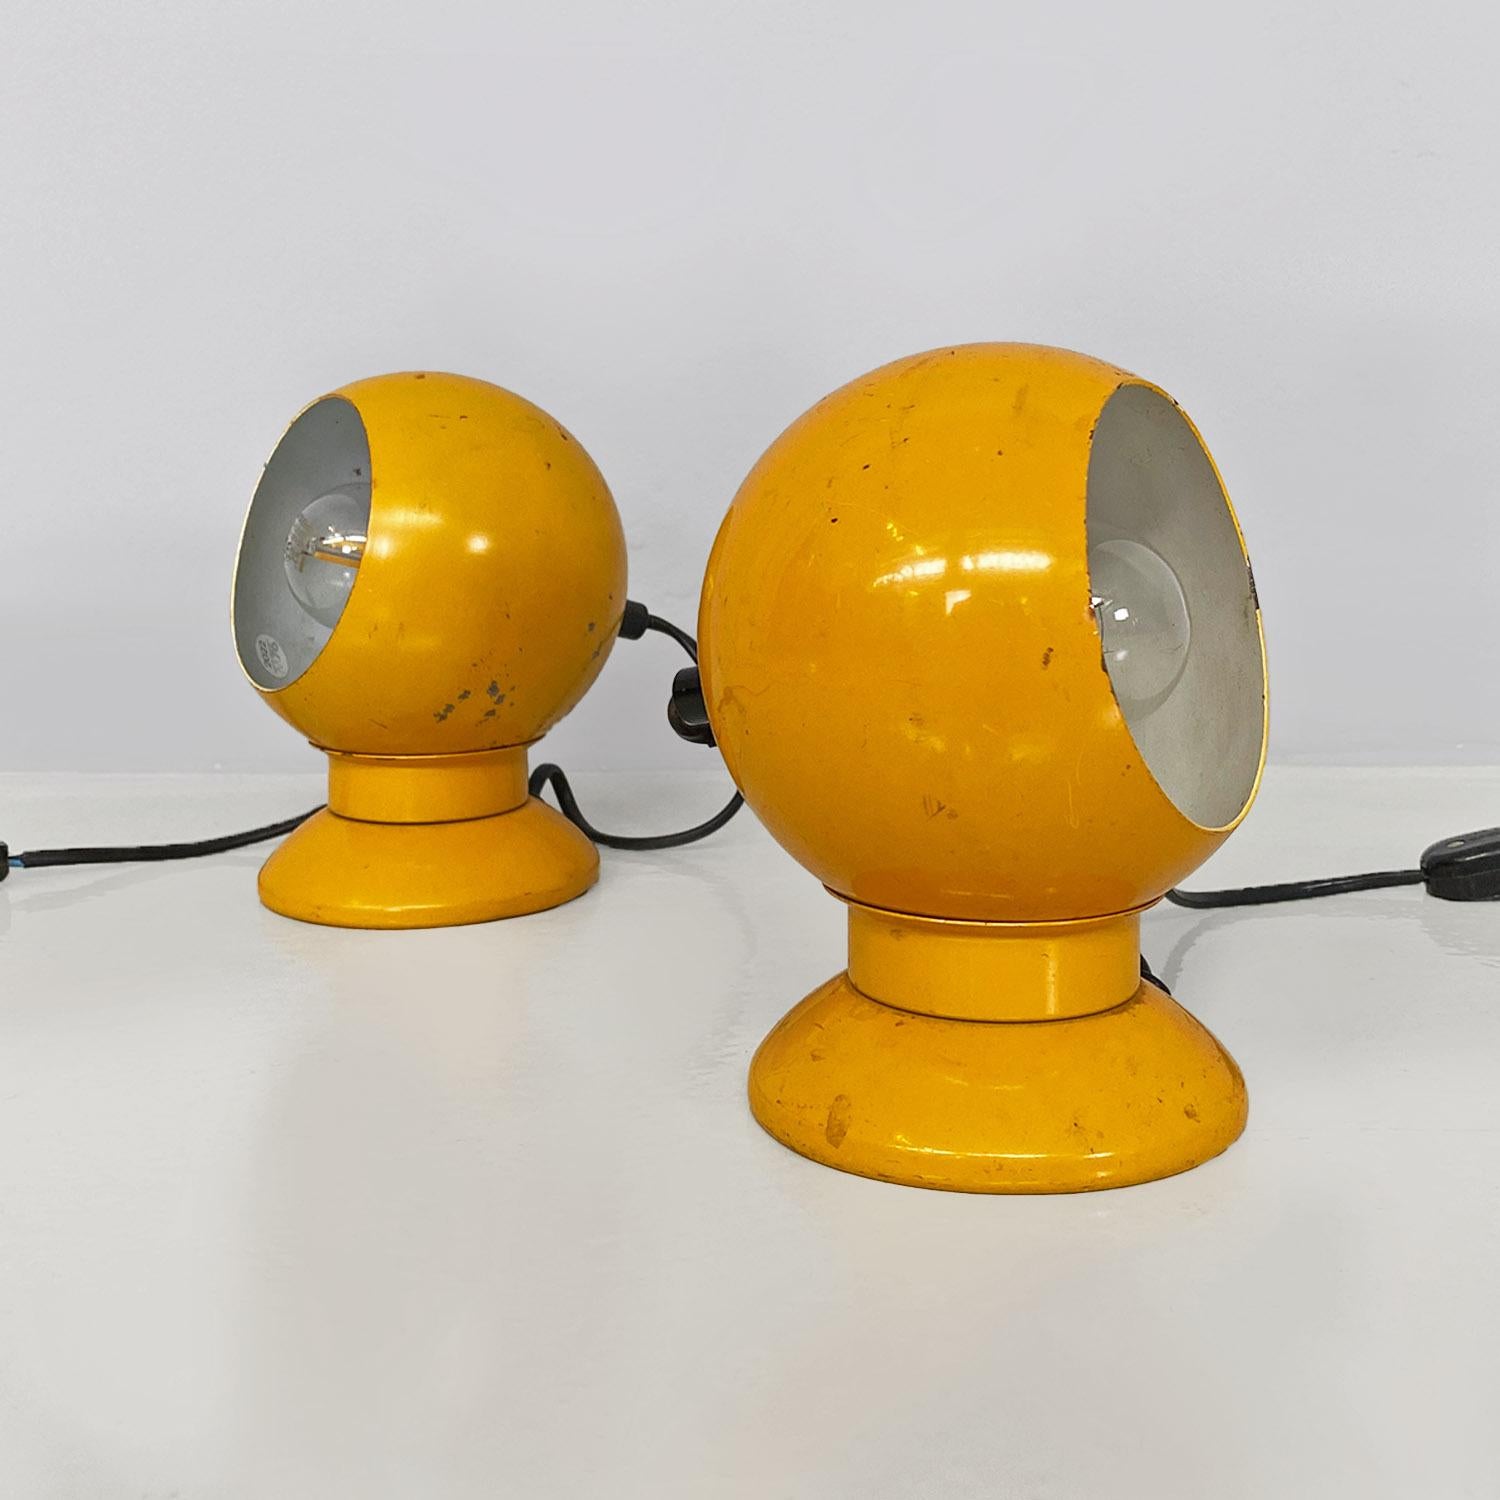 Modern Italian modern yellow metal table lamps or applique by Goffredo Reggiani, 1970s For Sale